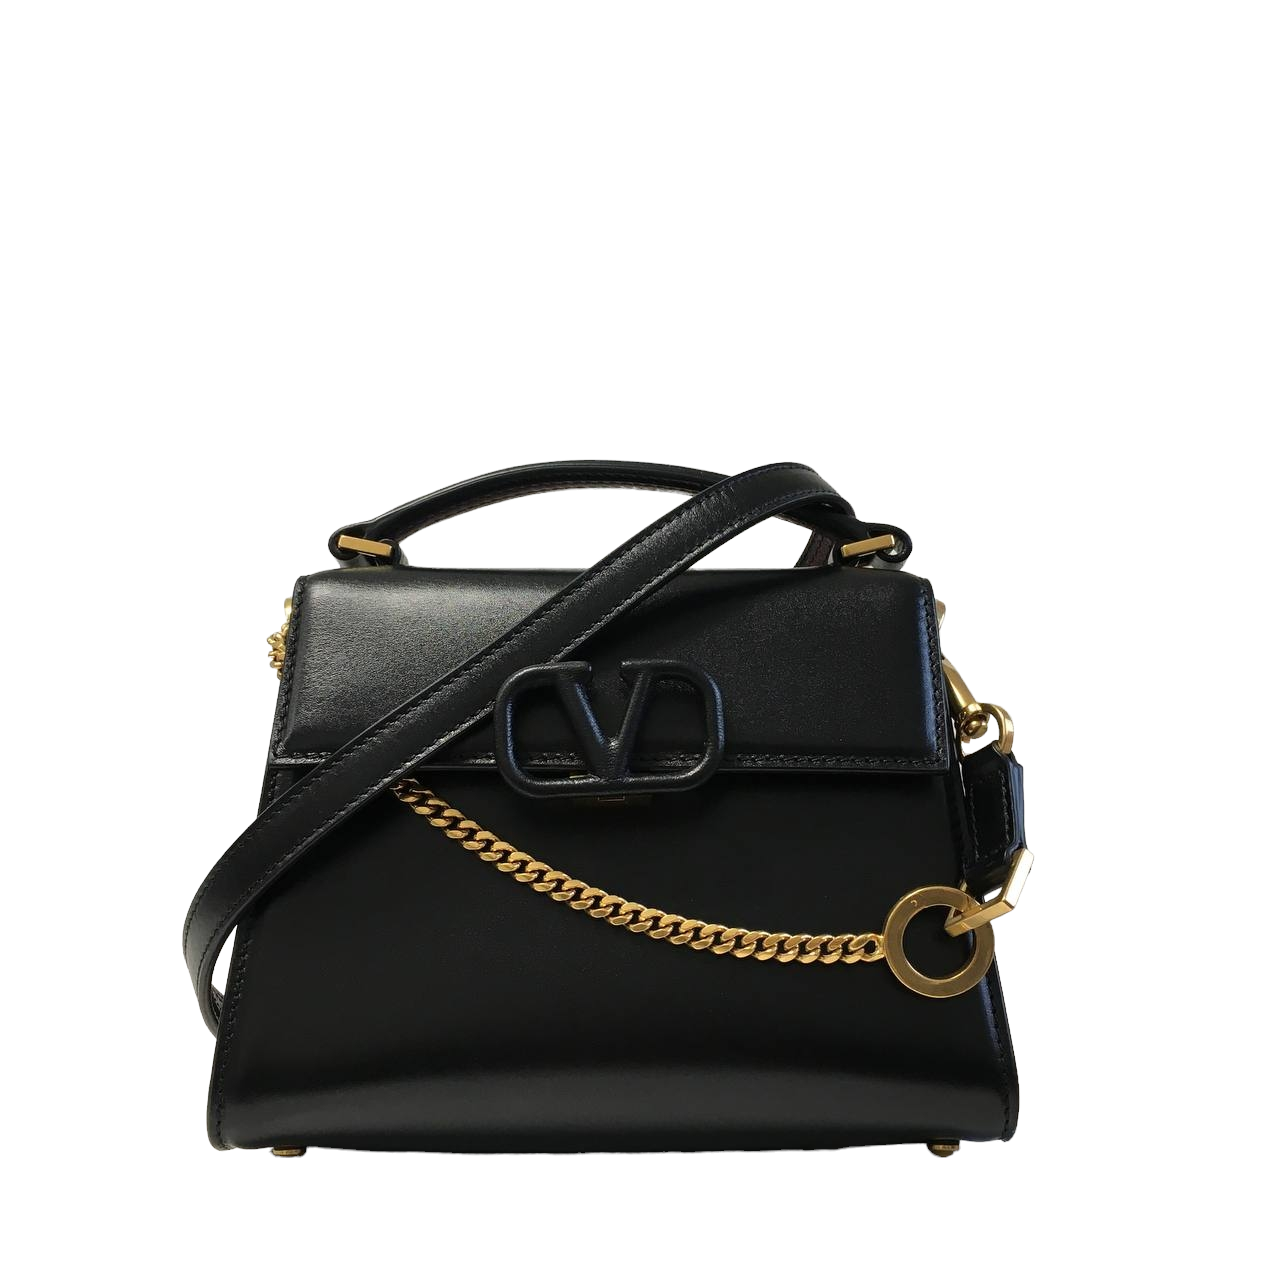 Buy authentic pre-owned Valentino |SELLUXURY international marketplace